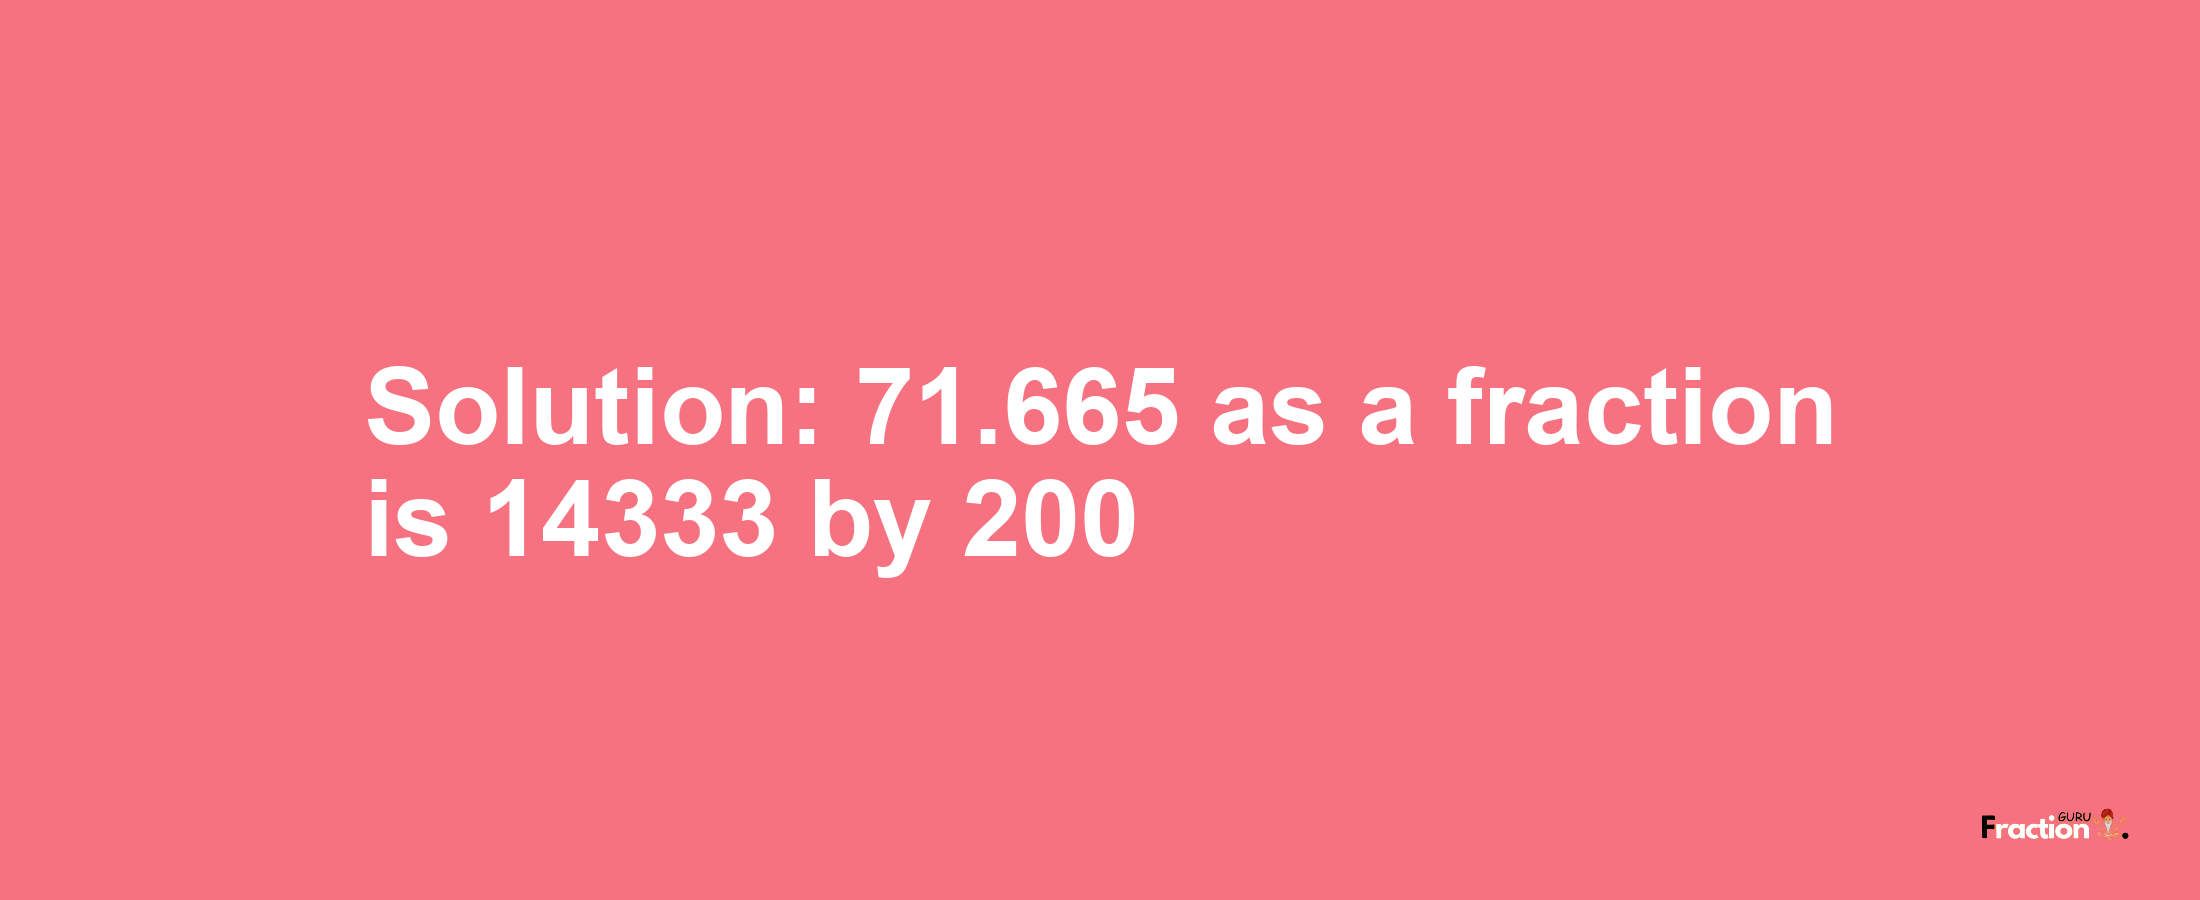 Solution:71.665 as a fraction is 14333/200